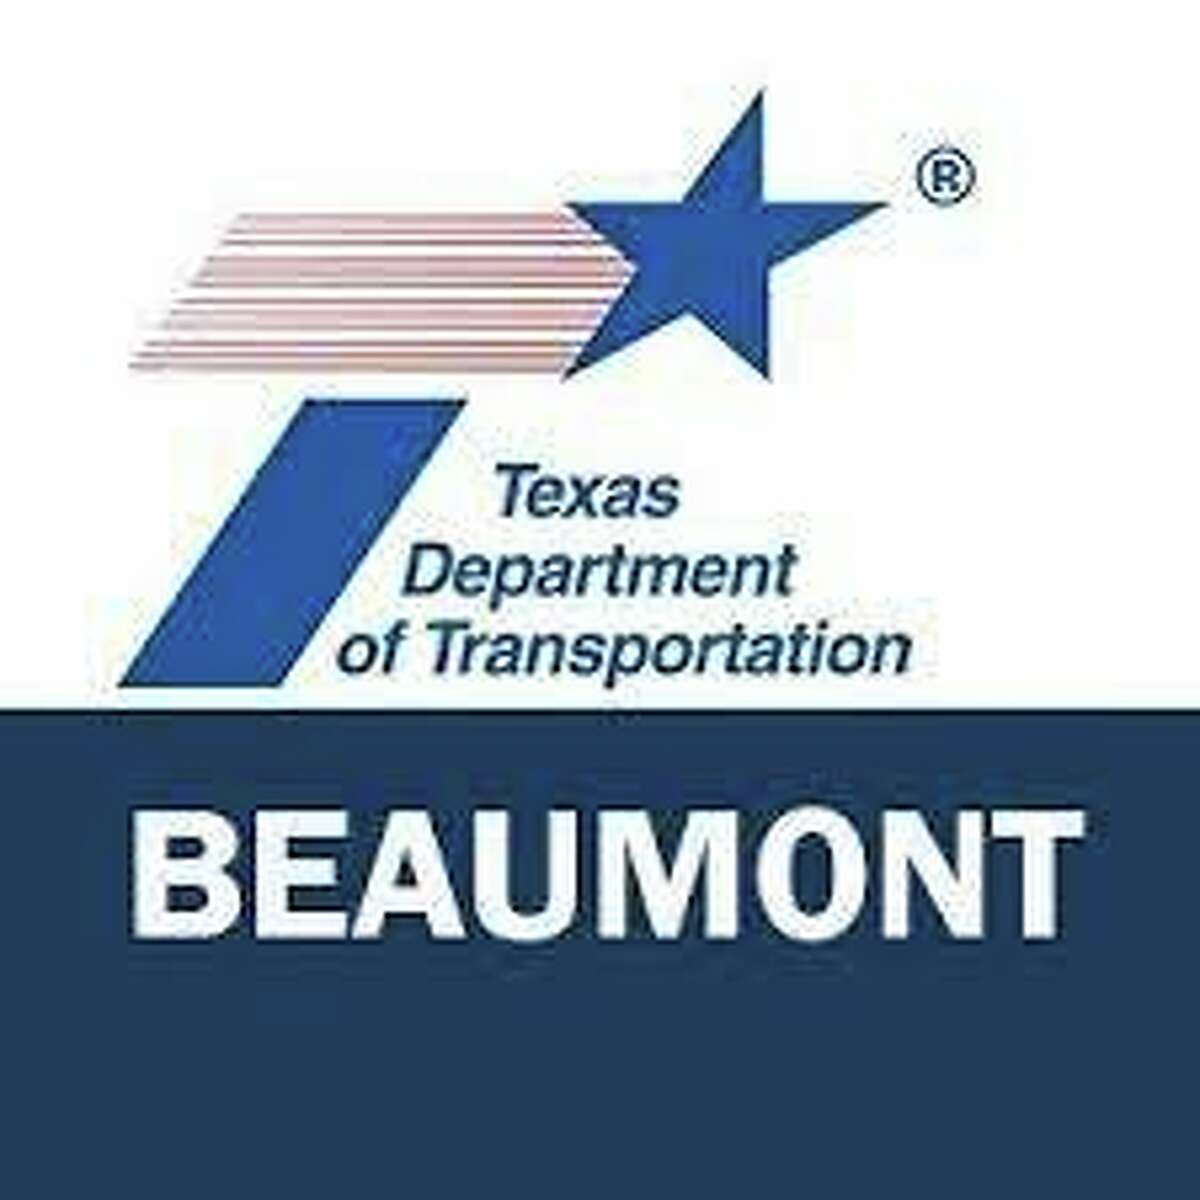 A portion of Interstate 10 will be closed overnight through Wednesday in Orange. The Texas Department of Transportation said the inside lane of I-10 Westbound will be closed from FM 3247 to Adams Bayou from 9 p.m. to 5 a.m for work in the median.